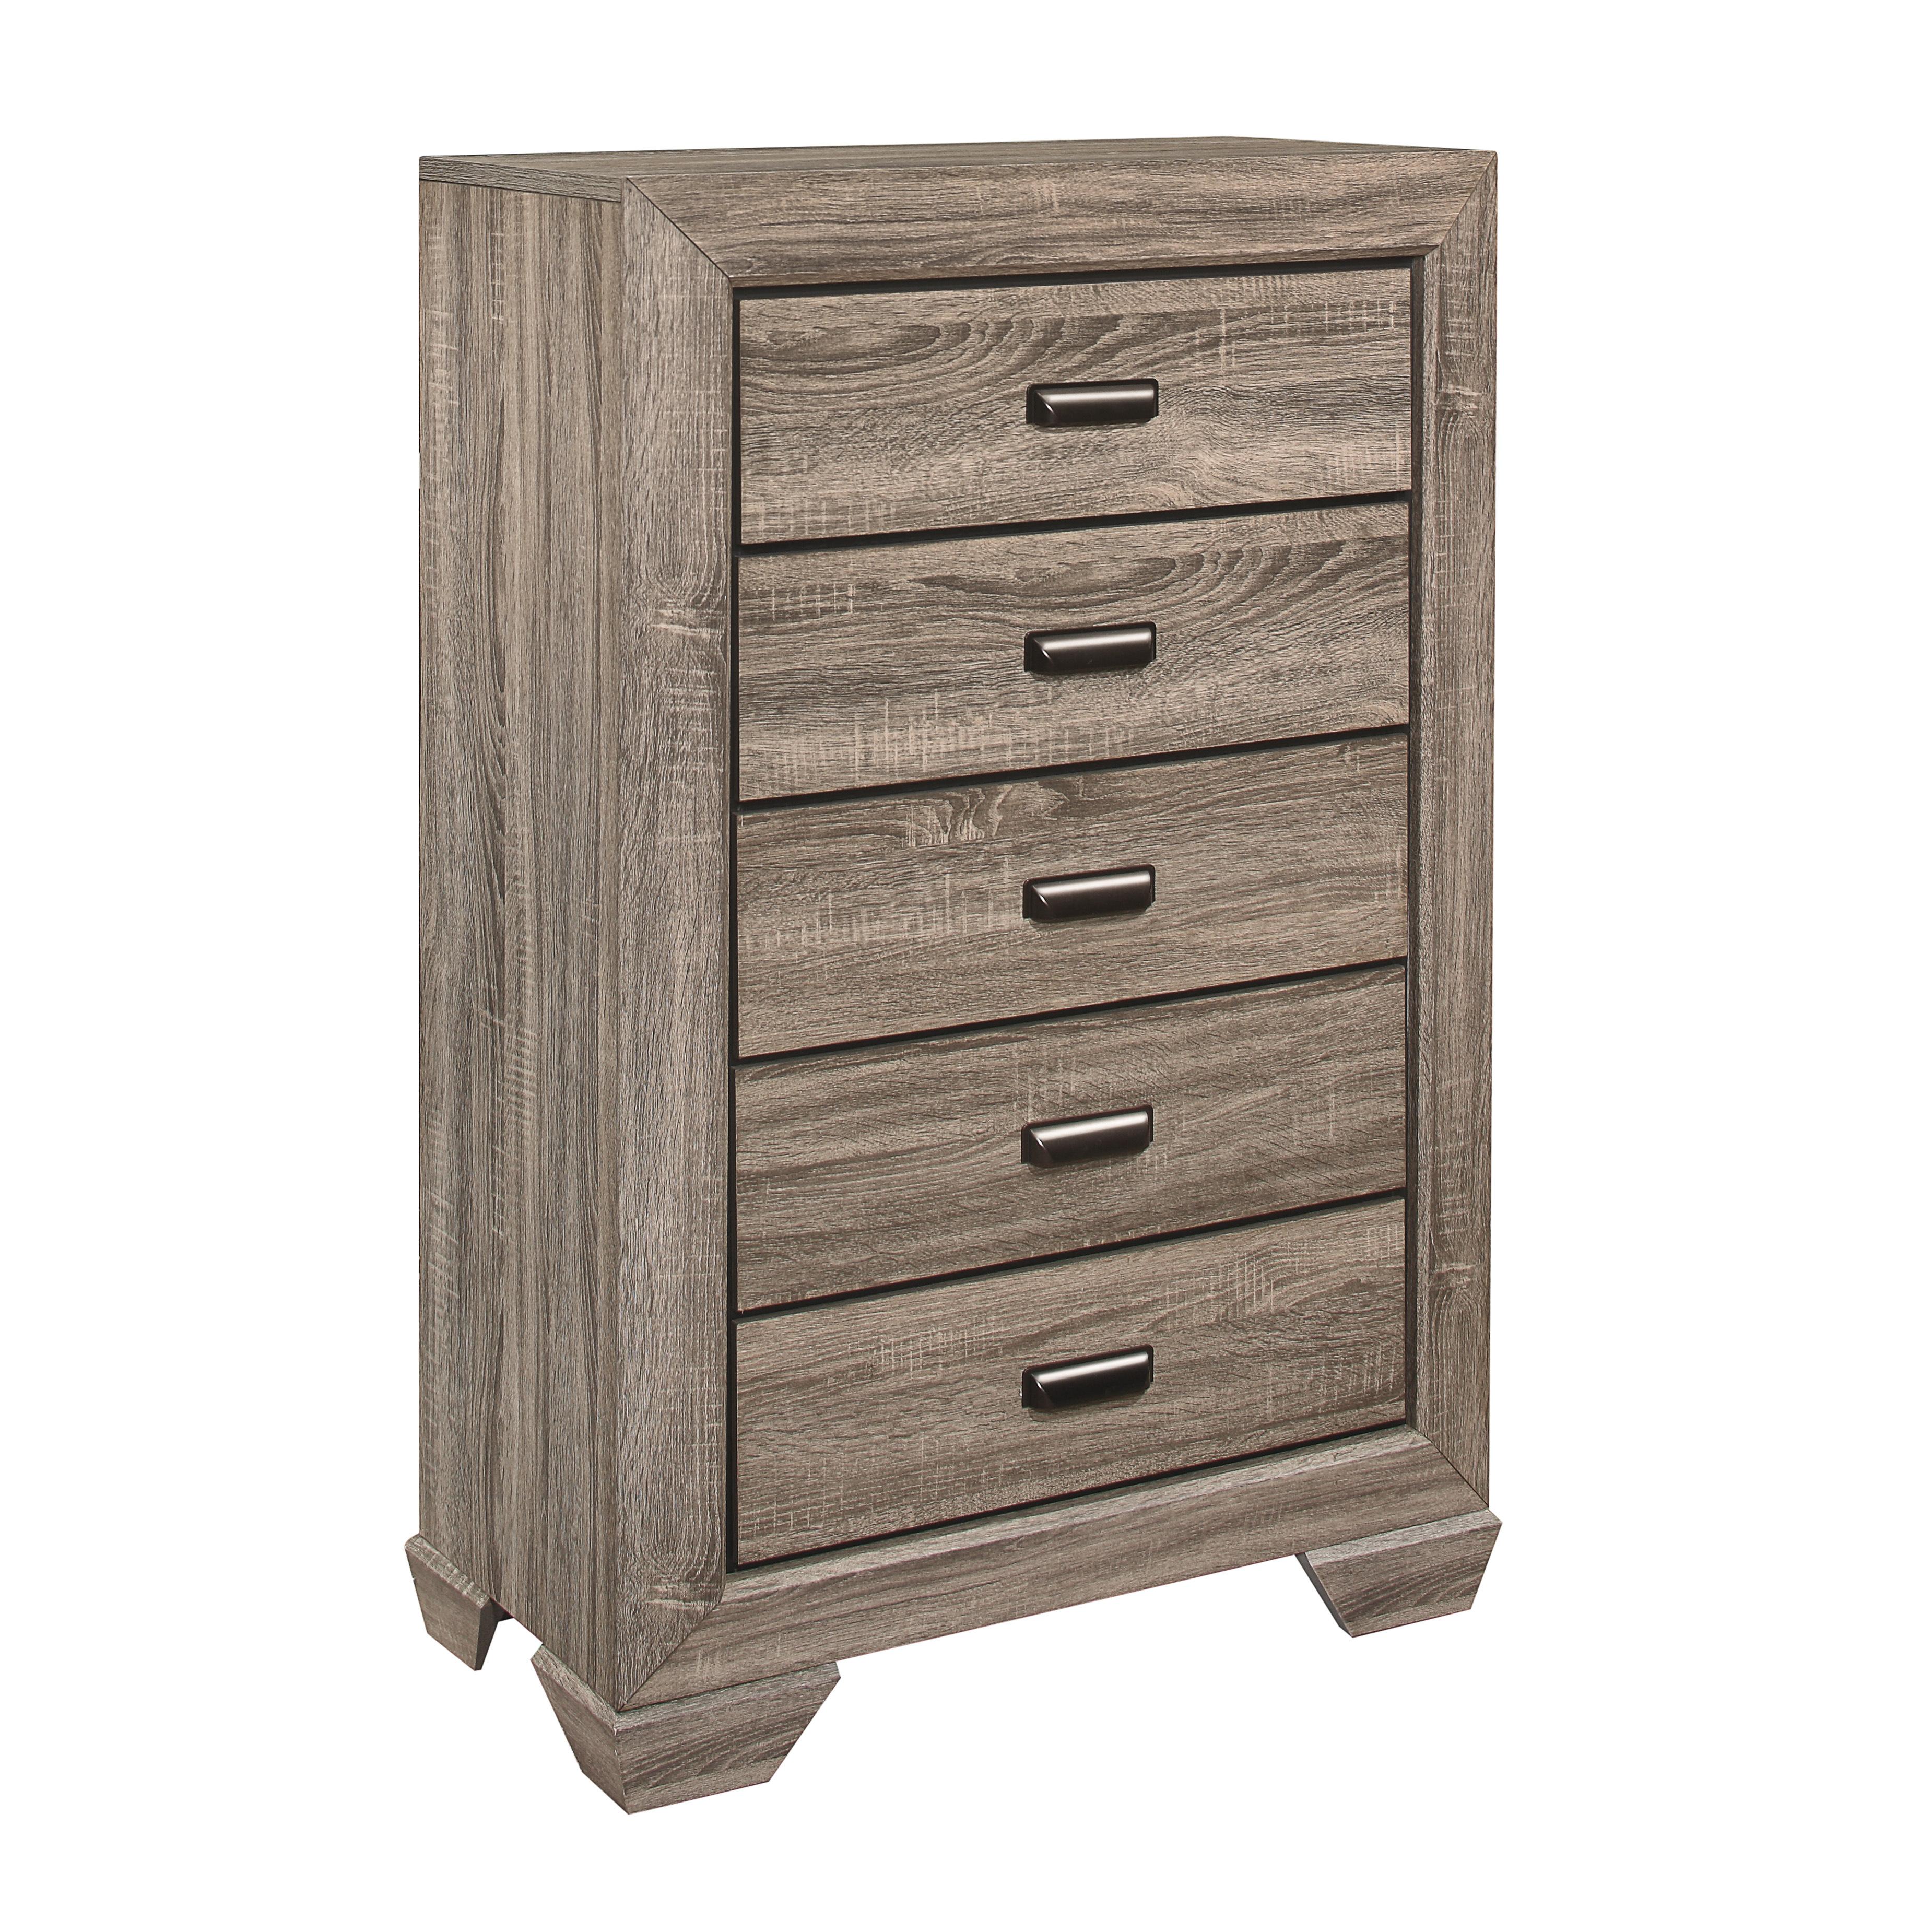 Rustic Chest 1904-9 Beechnut 1904-9 in Natural 